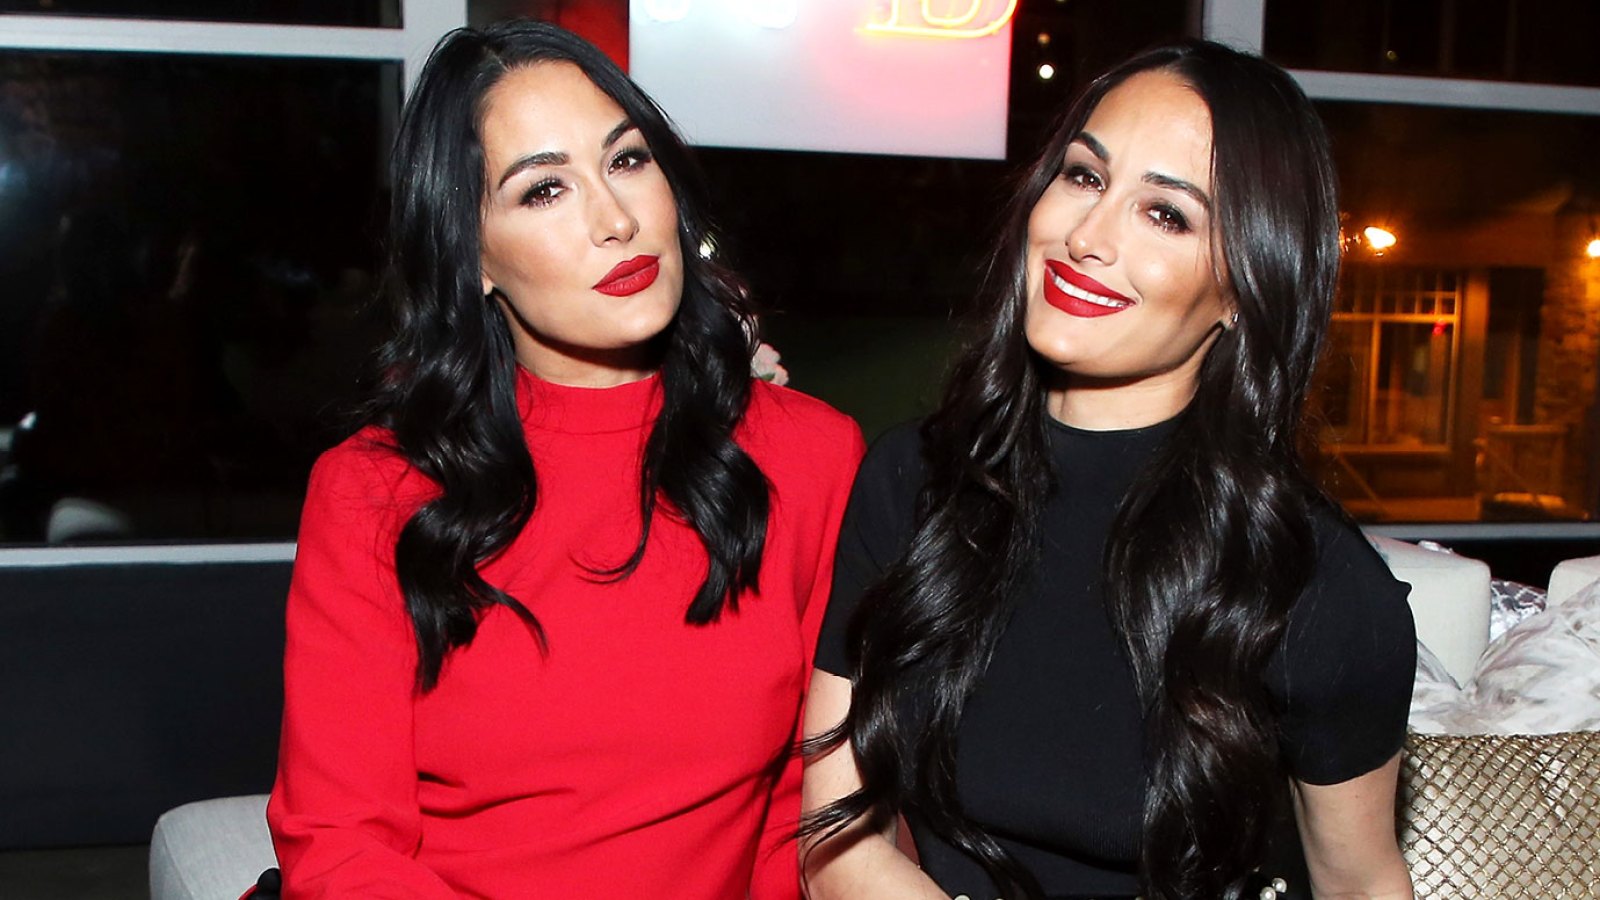 Nikki Bella Says I Do: Clothes, Outfits, Brands, Style and Looks